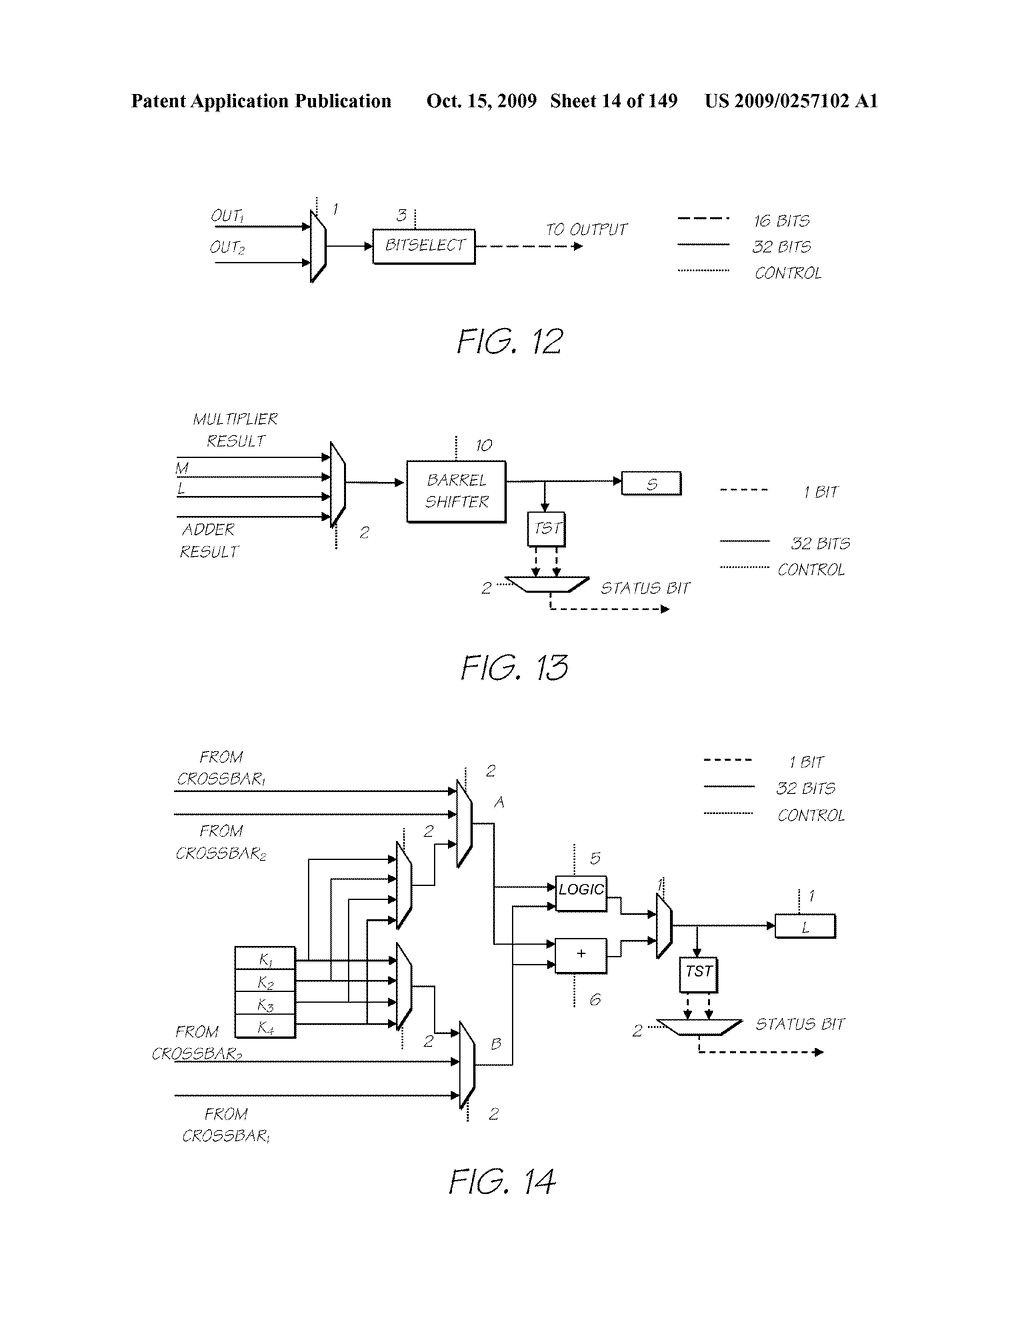 IMAGE PROCESSING APPARATUS HAVING CARD READER FOR APPLYING EFFECTS STORED ON A CARD TO A STORED IMAGE - diagram, schematic, and image 15